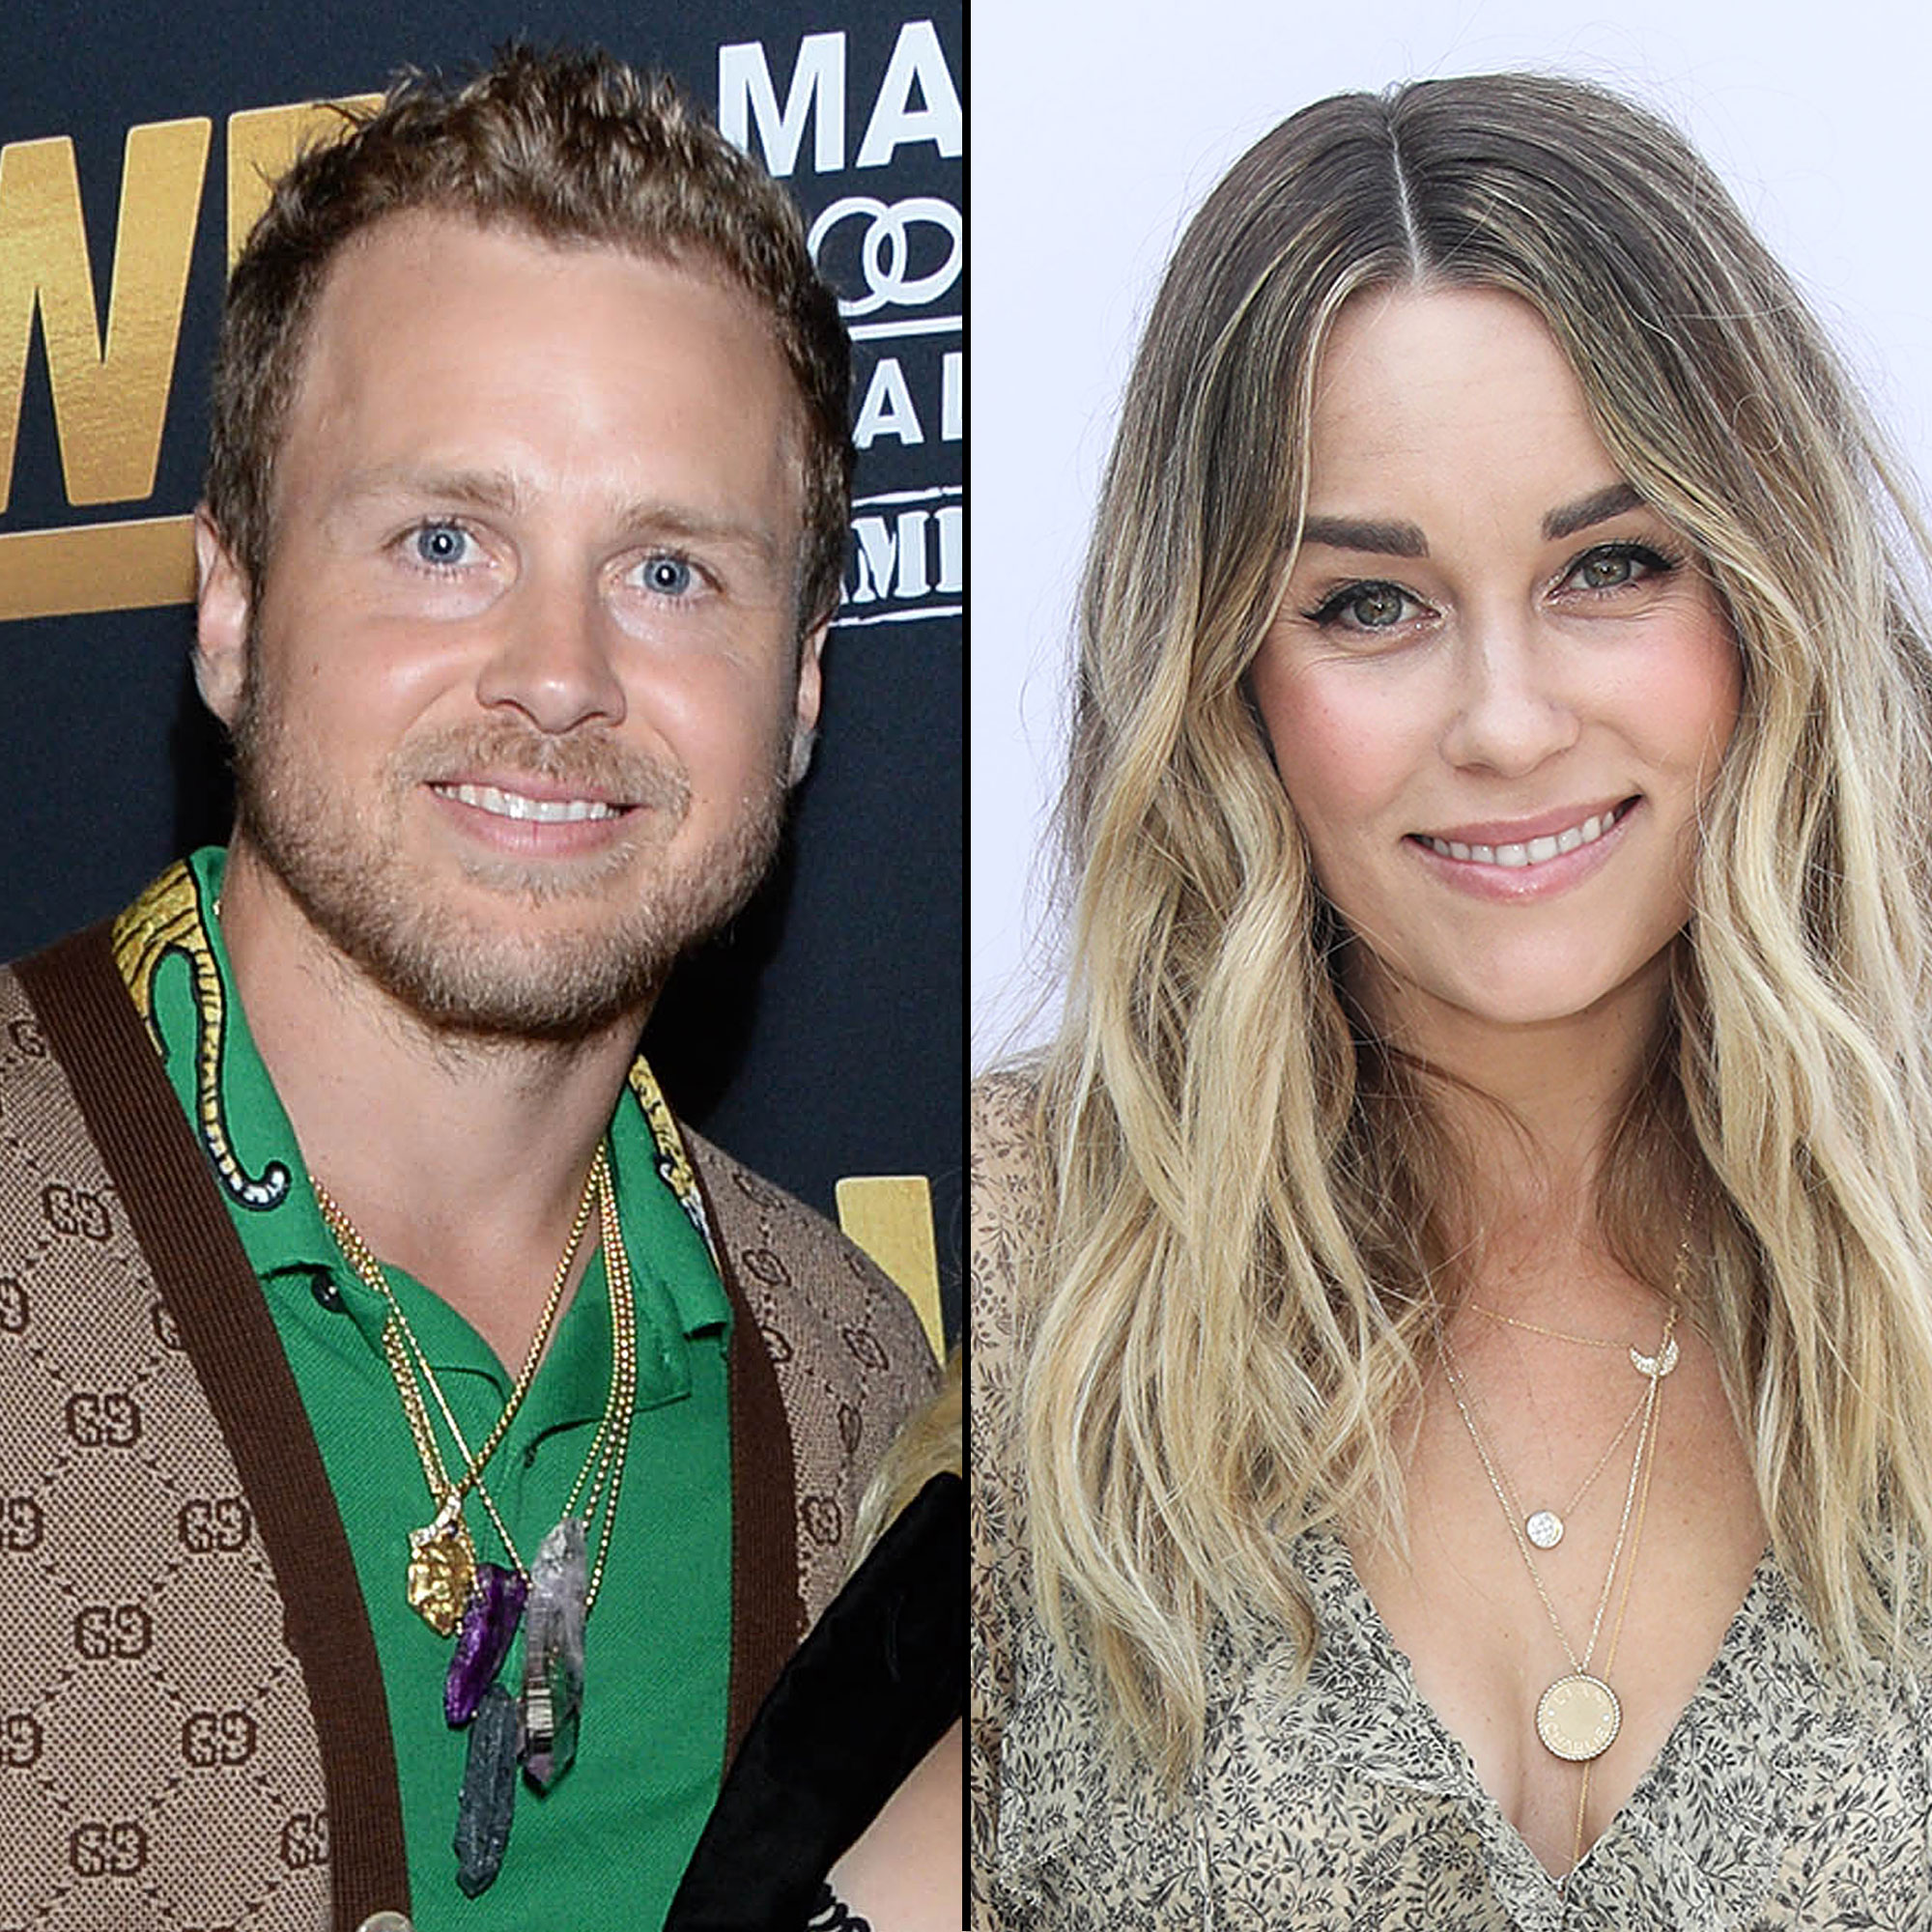 https://www.usmagazine.com/wp-content/uploads/2021/10/Spencer-Pratt-Doesnt-Think-Lauren-Conrad-Would-Add-to-The-Hills-Revival-Series-Her-World-Is-Too-Curated-to-Succeed-in-Reality-TV.jpg?quality=40&strip=all